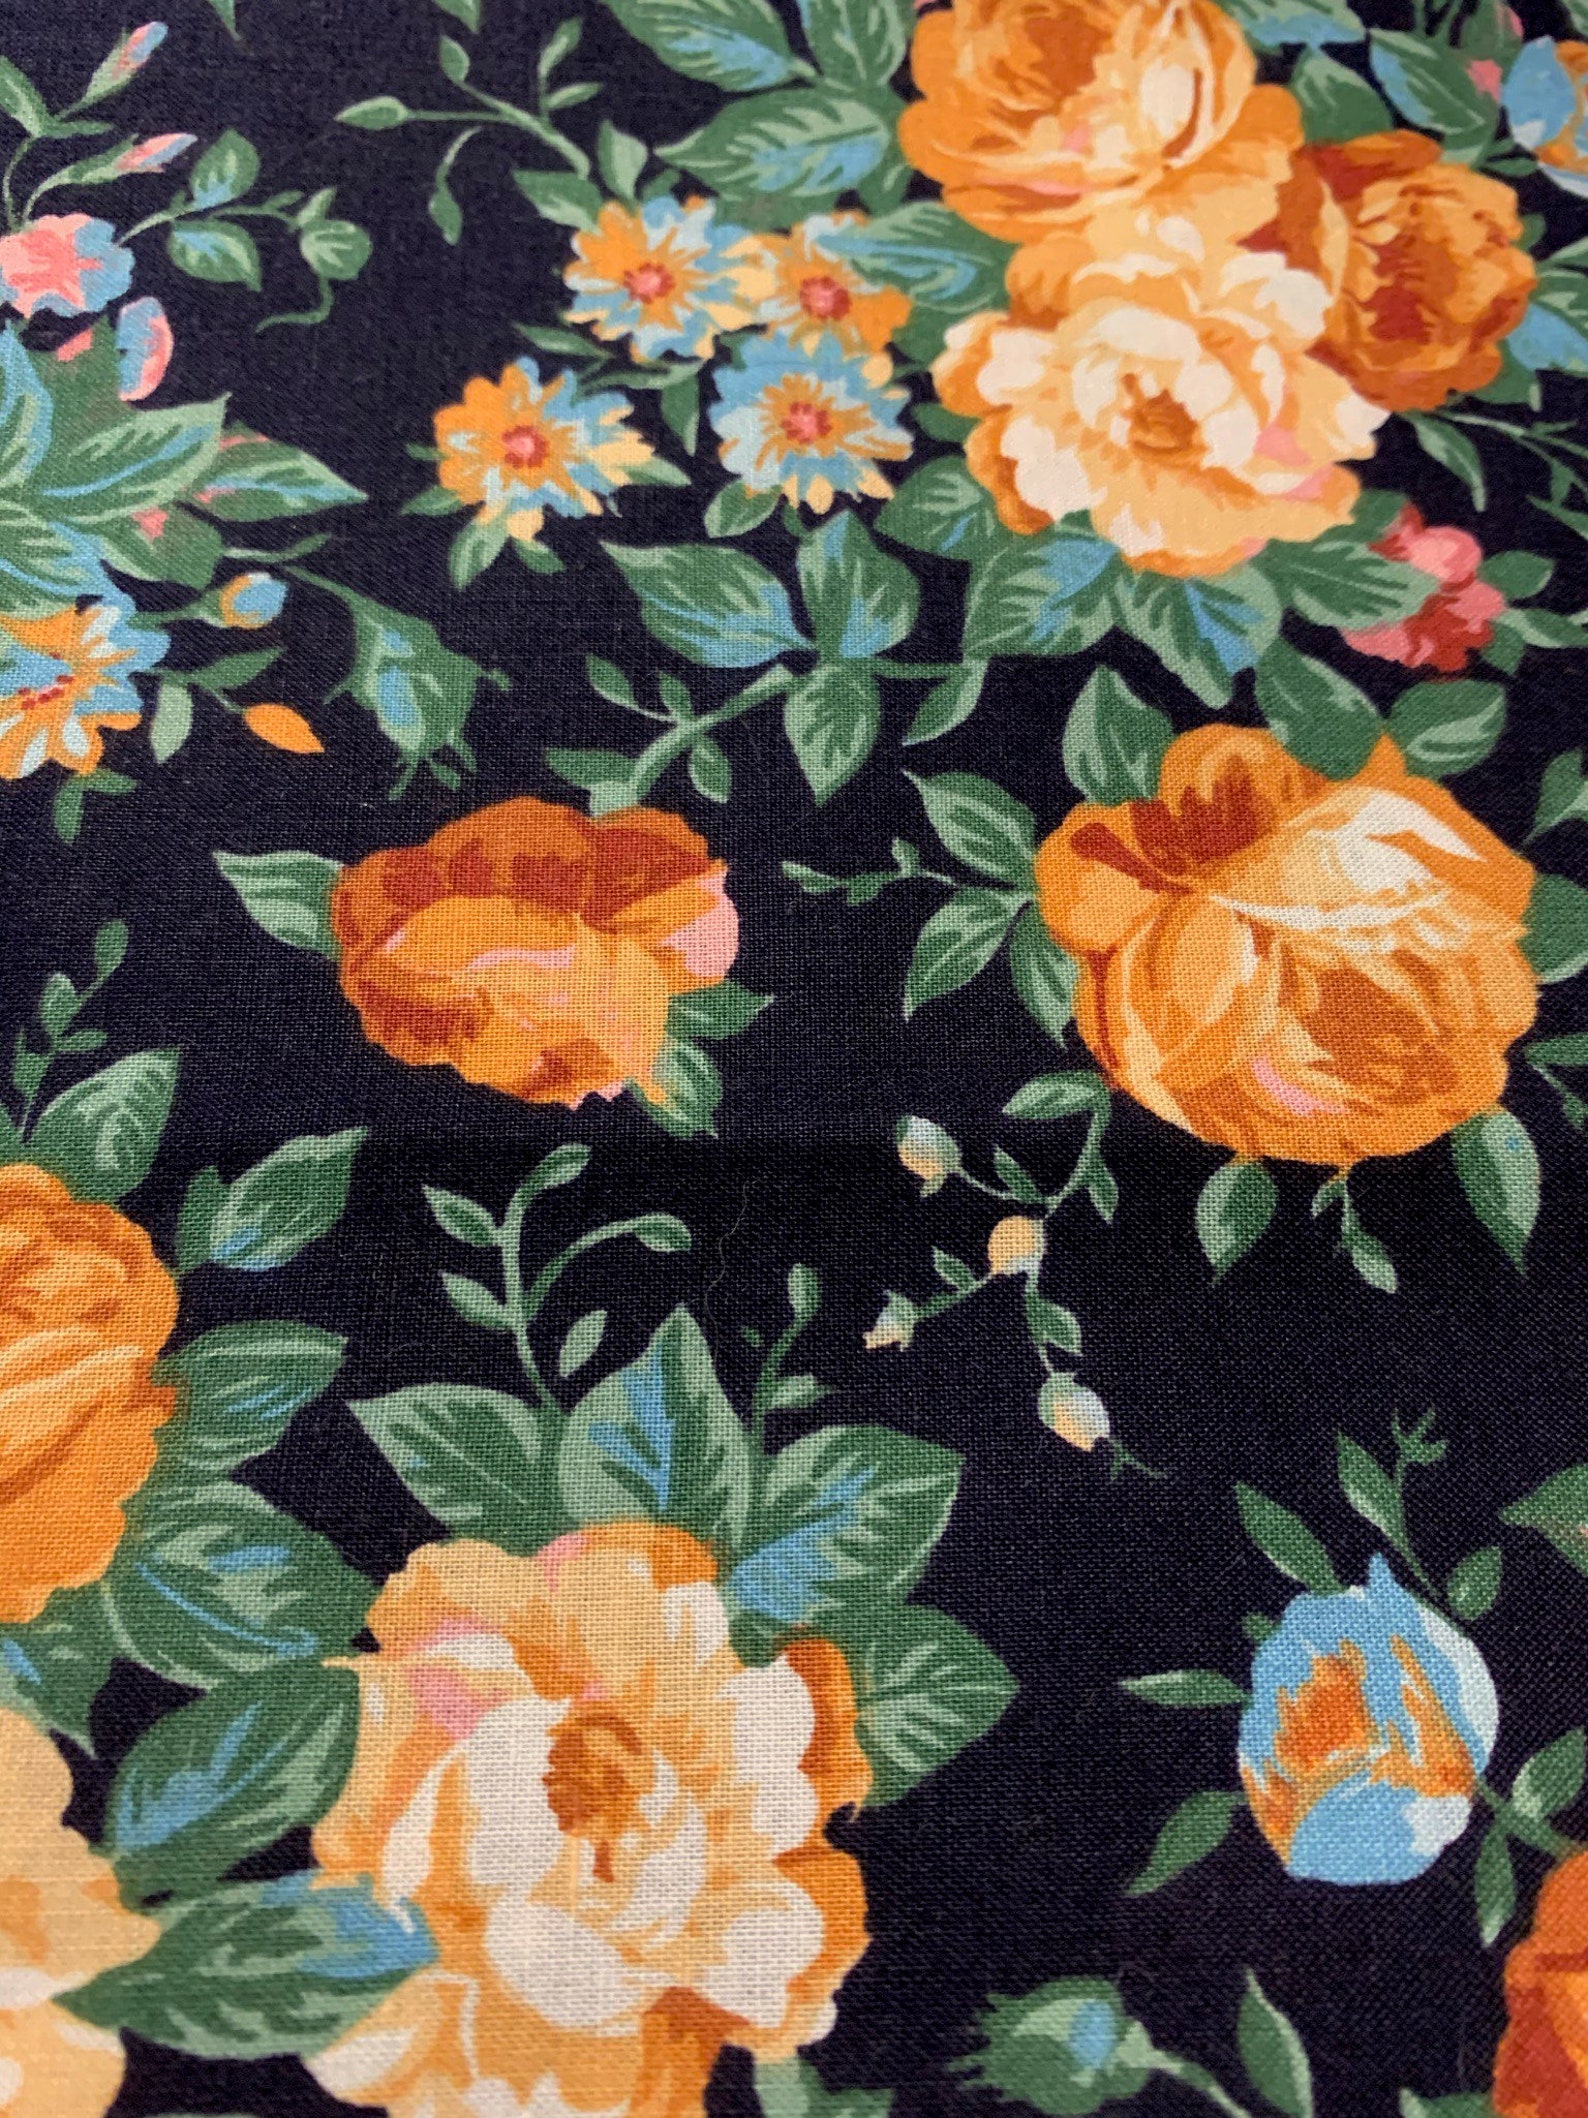 1/2 Yd Vintage OZARK Calico Roses Flowers by Fabri-quilt - Etsy